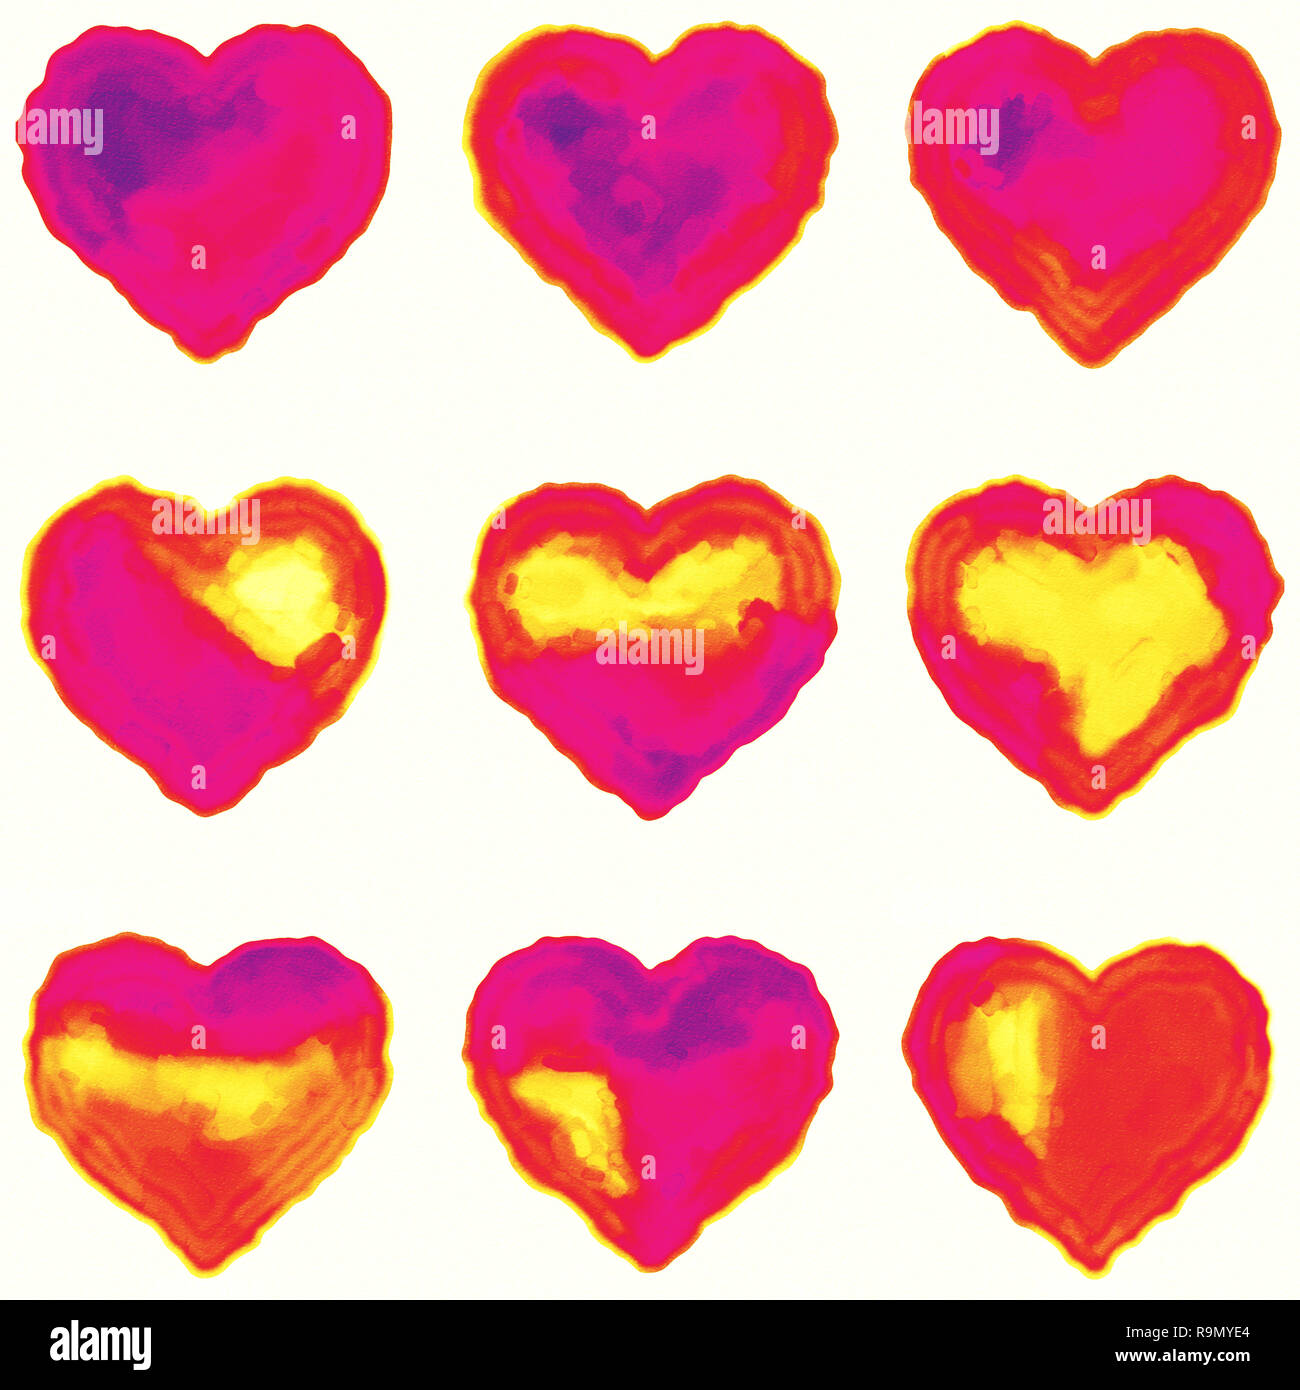 Set of nine colorful hearts. Digital watercolor on white paper. Red, yellow, and purple. Graphic resource for designers. Stock Photo